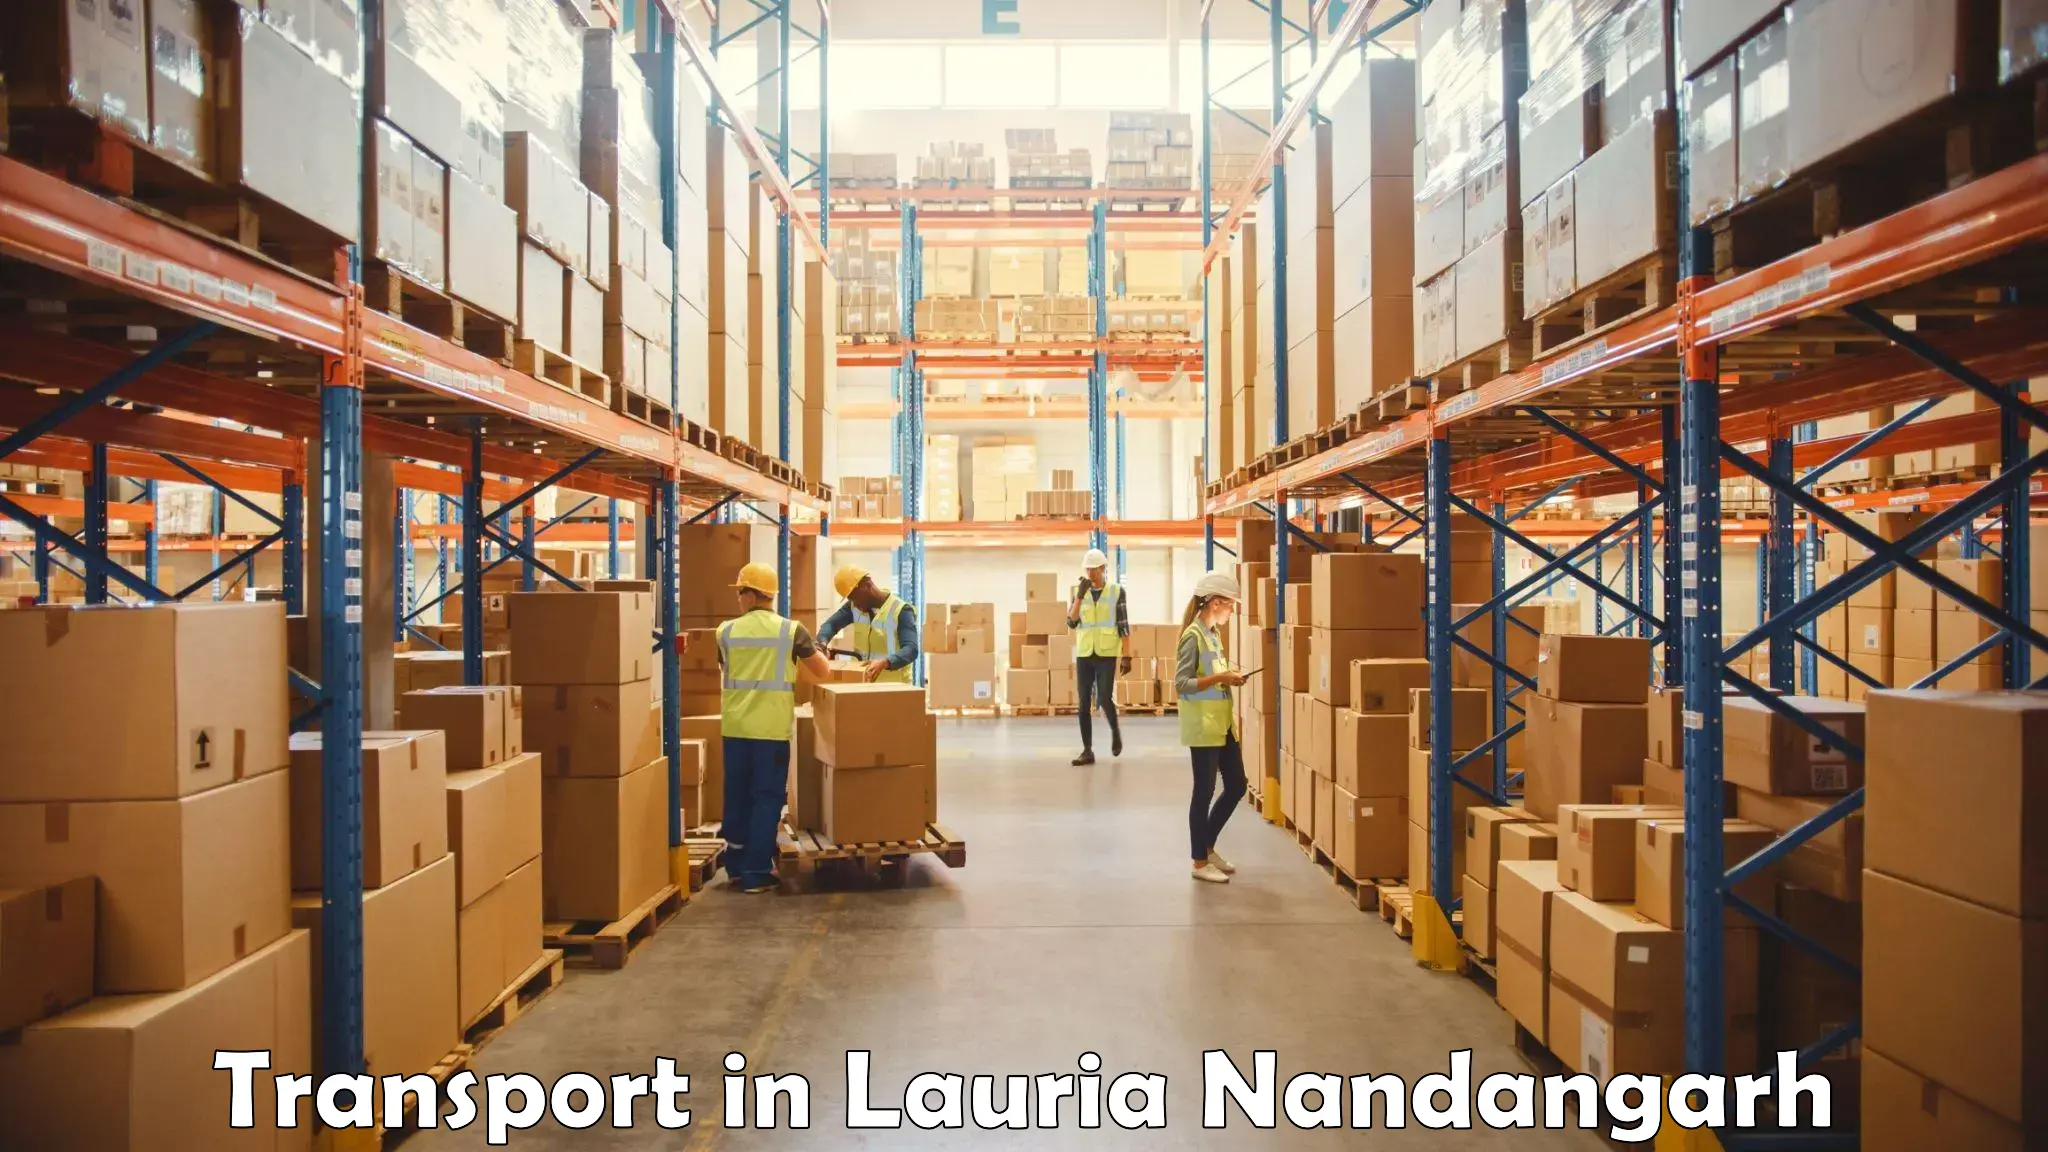 Transport services in Lauria Nandangarh